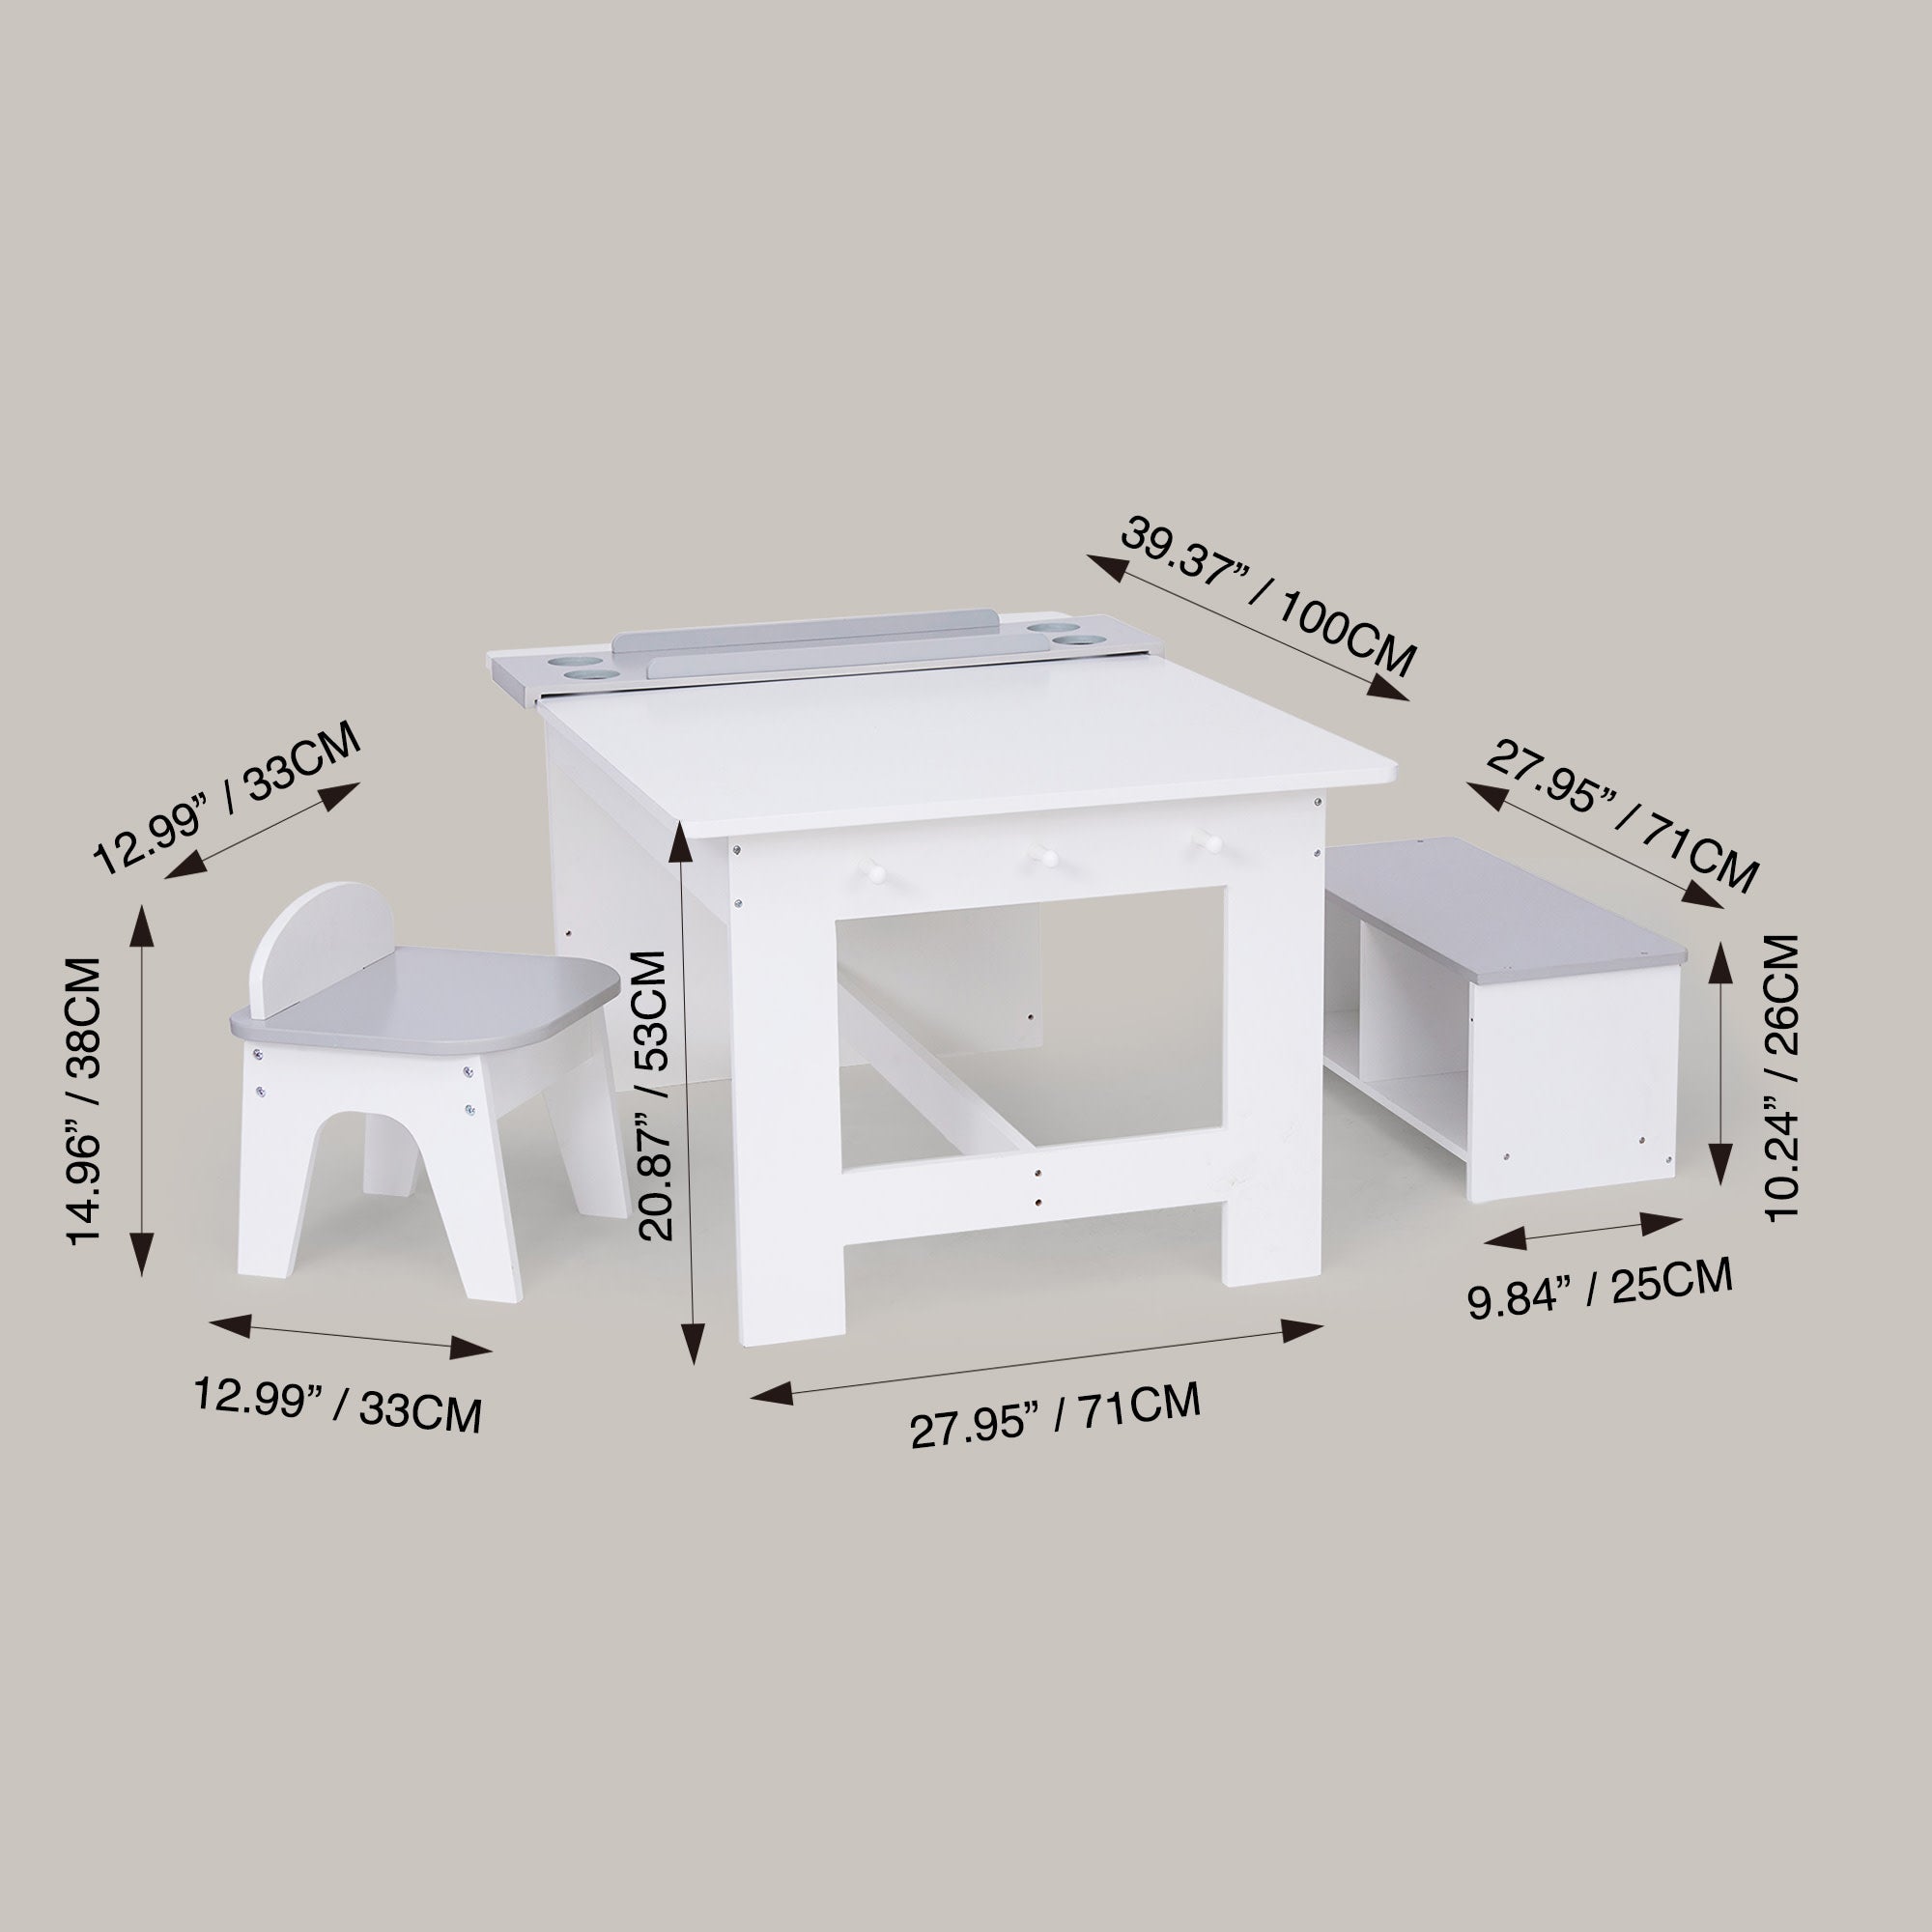 Fantasy Fields Little Monet Art Table with Paper Roll, Stool, Bench and More, White/Gray